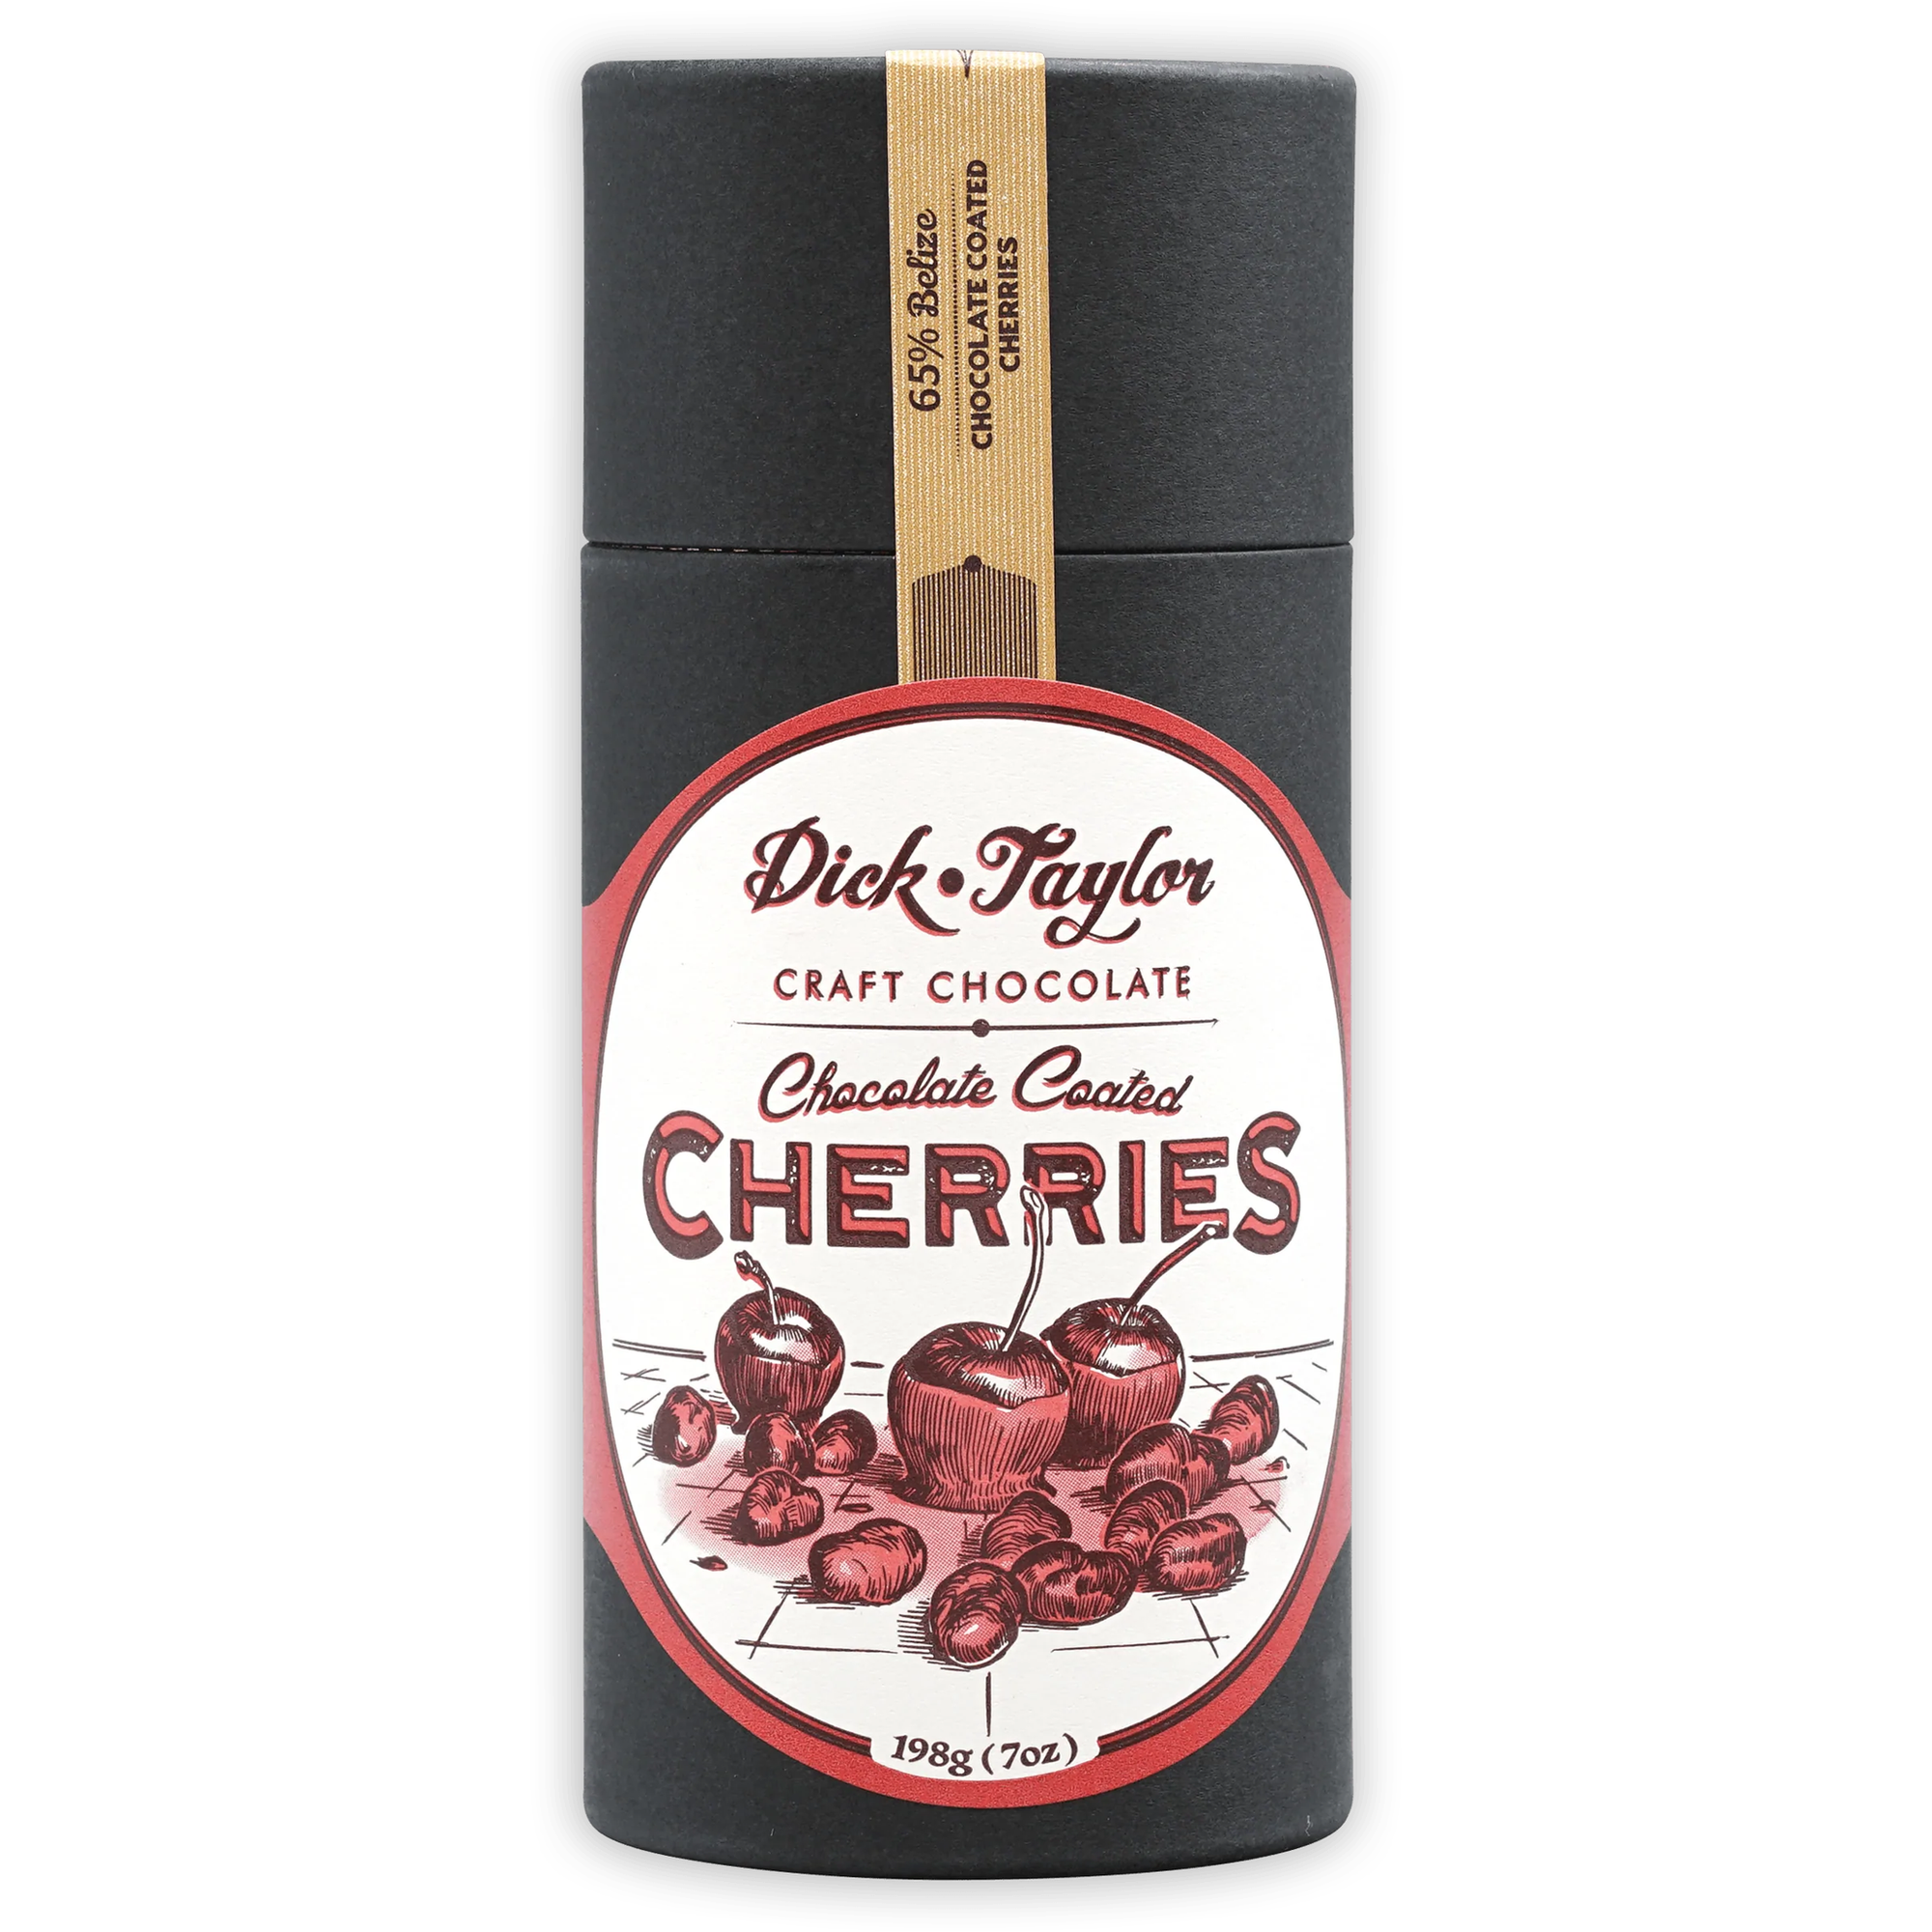 Dick Taylor Chocolate Covered Cherries